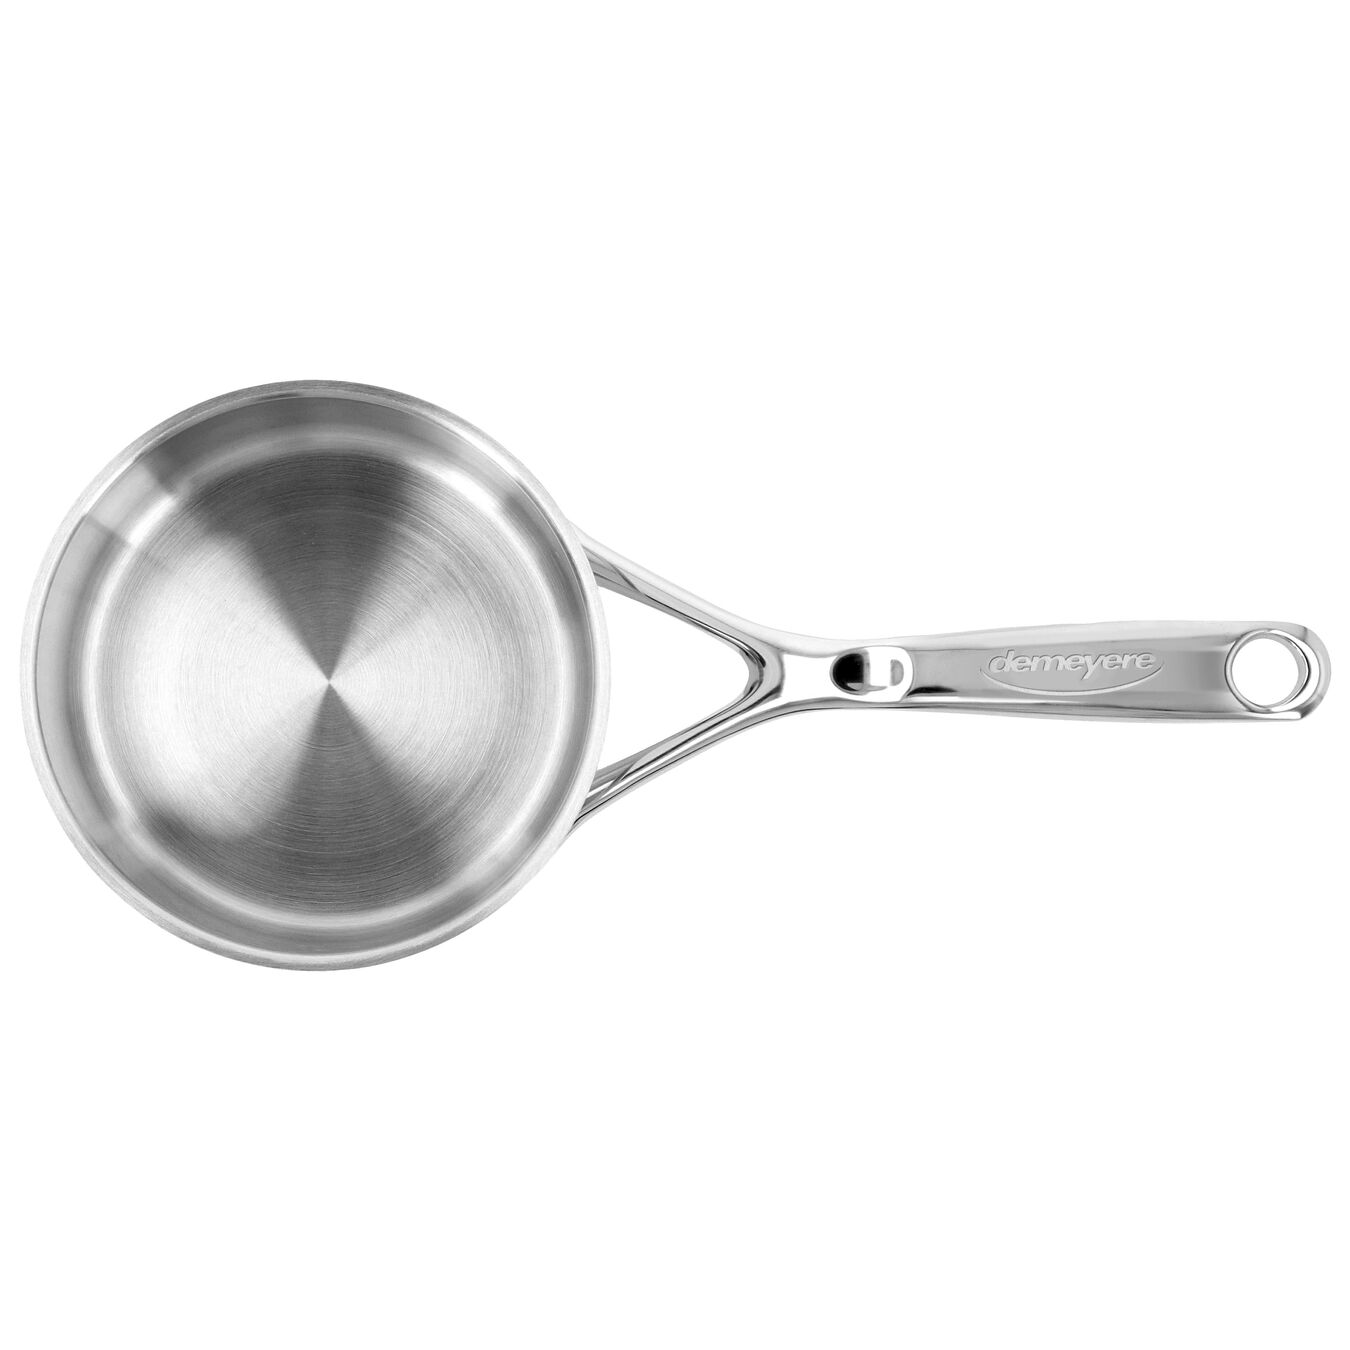 14 cm 18/10 Stainless Steel Saucepan with lid silver,,large 3